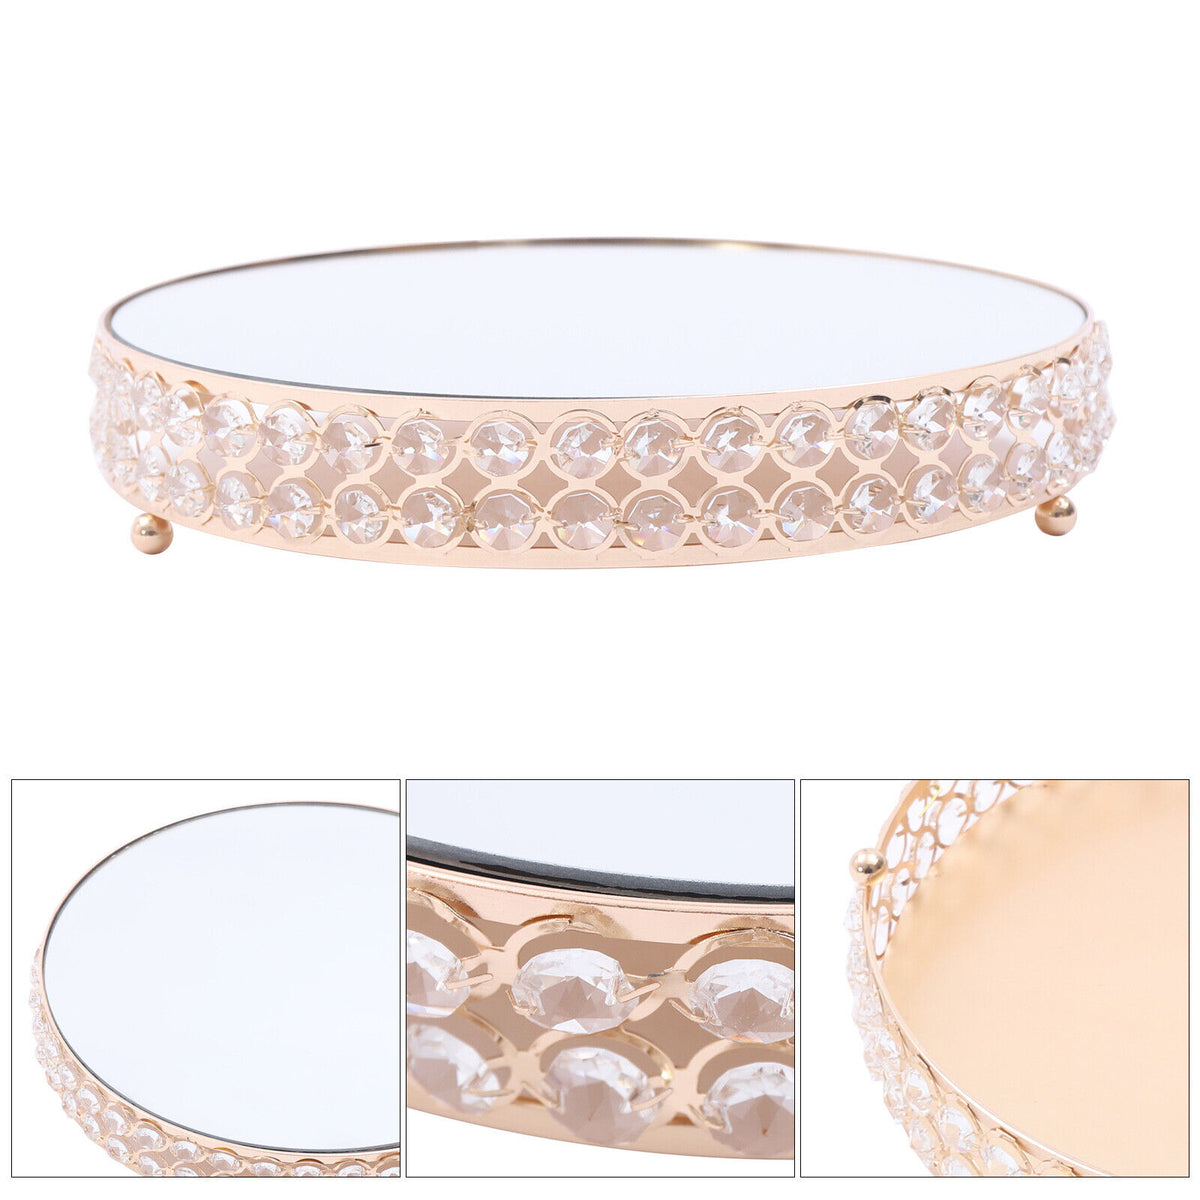 European Cake Stand With Gold And Crystal Design For Weddings & Parties